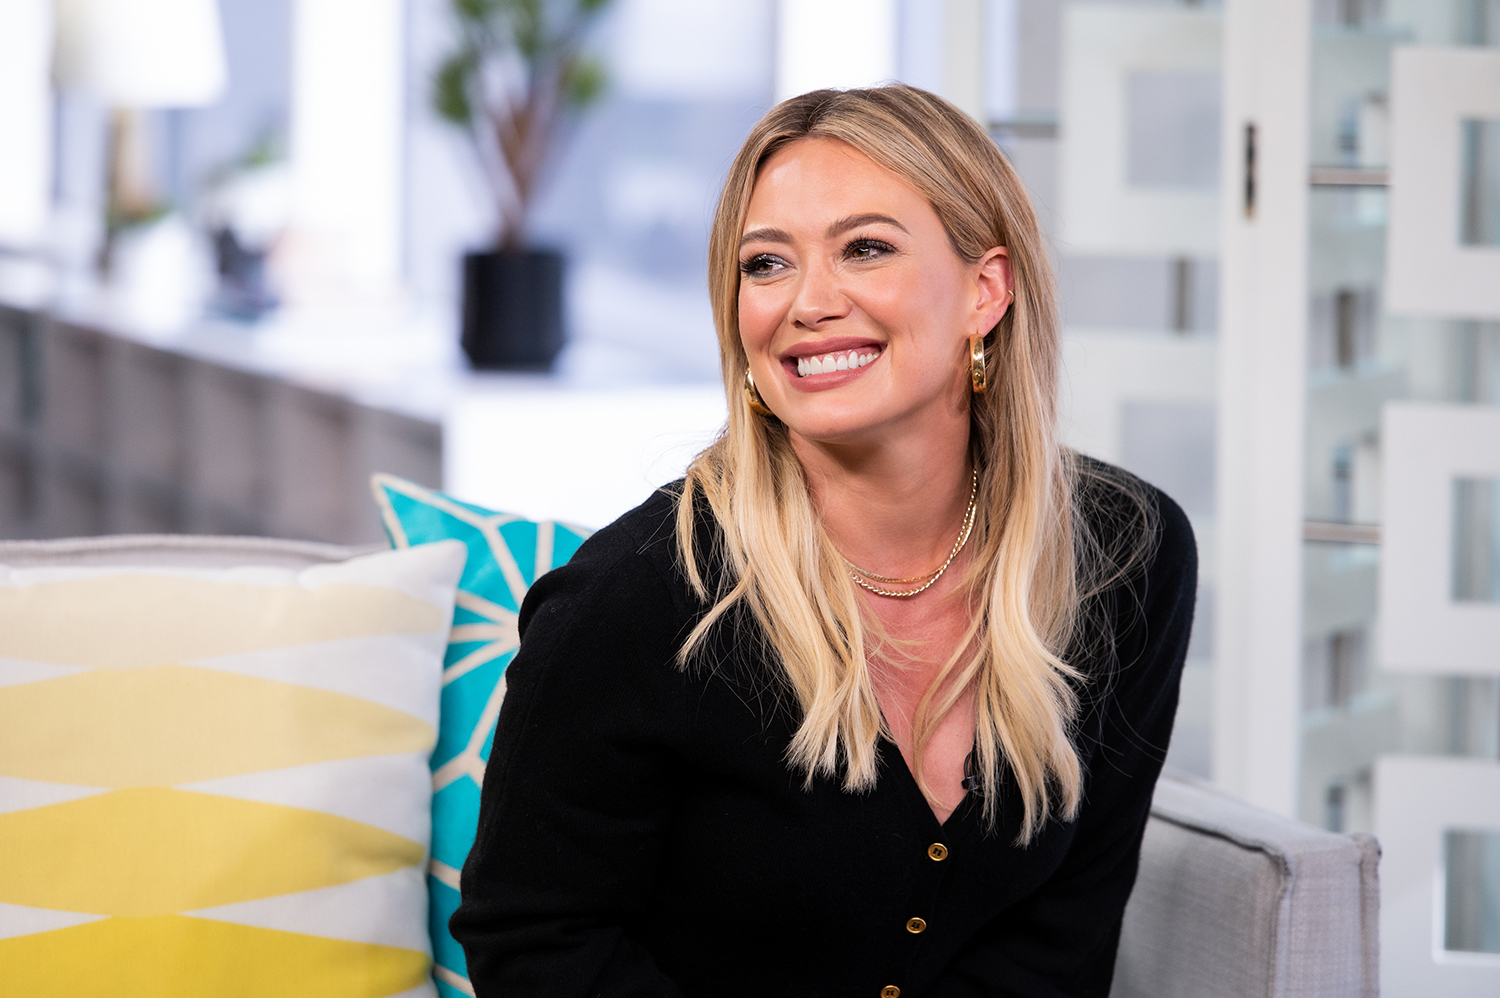 How I Met Your Father star Hilary Duff talks Lizzie McGuire and Younger on Daily Pop